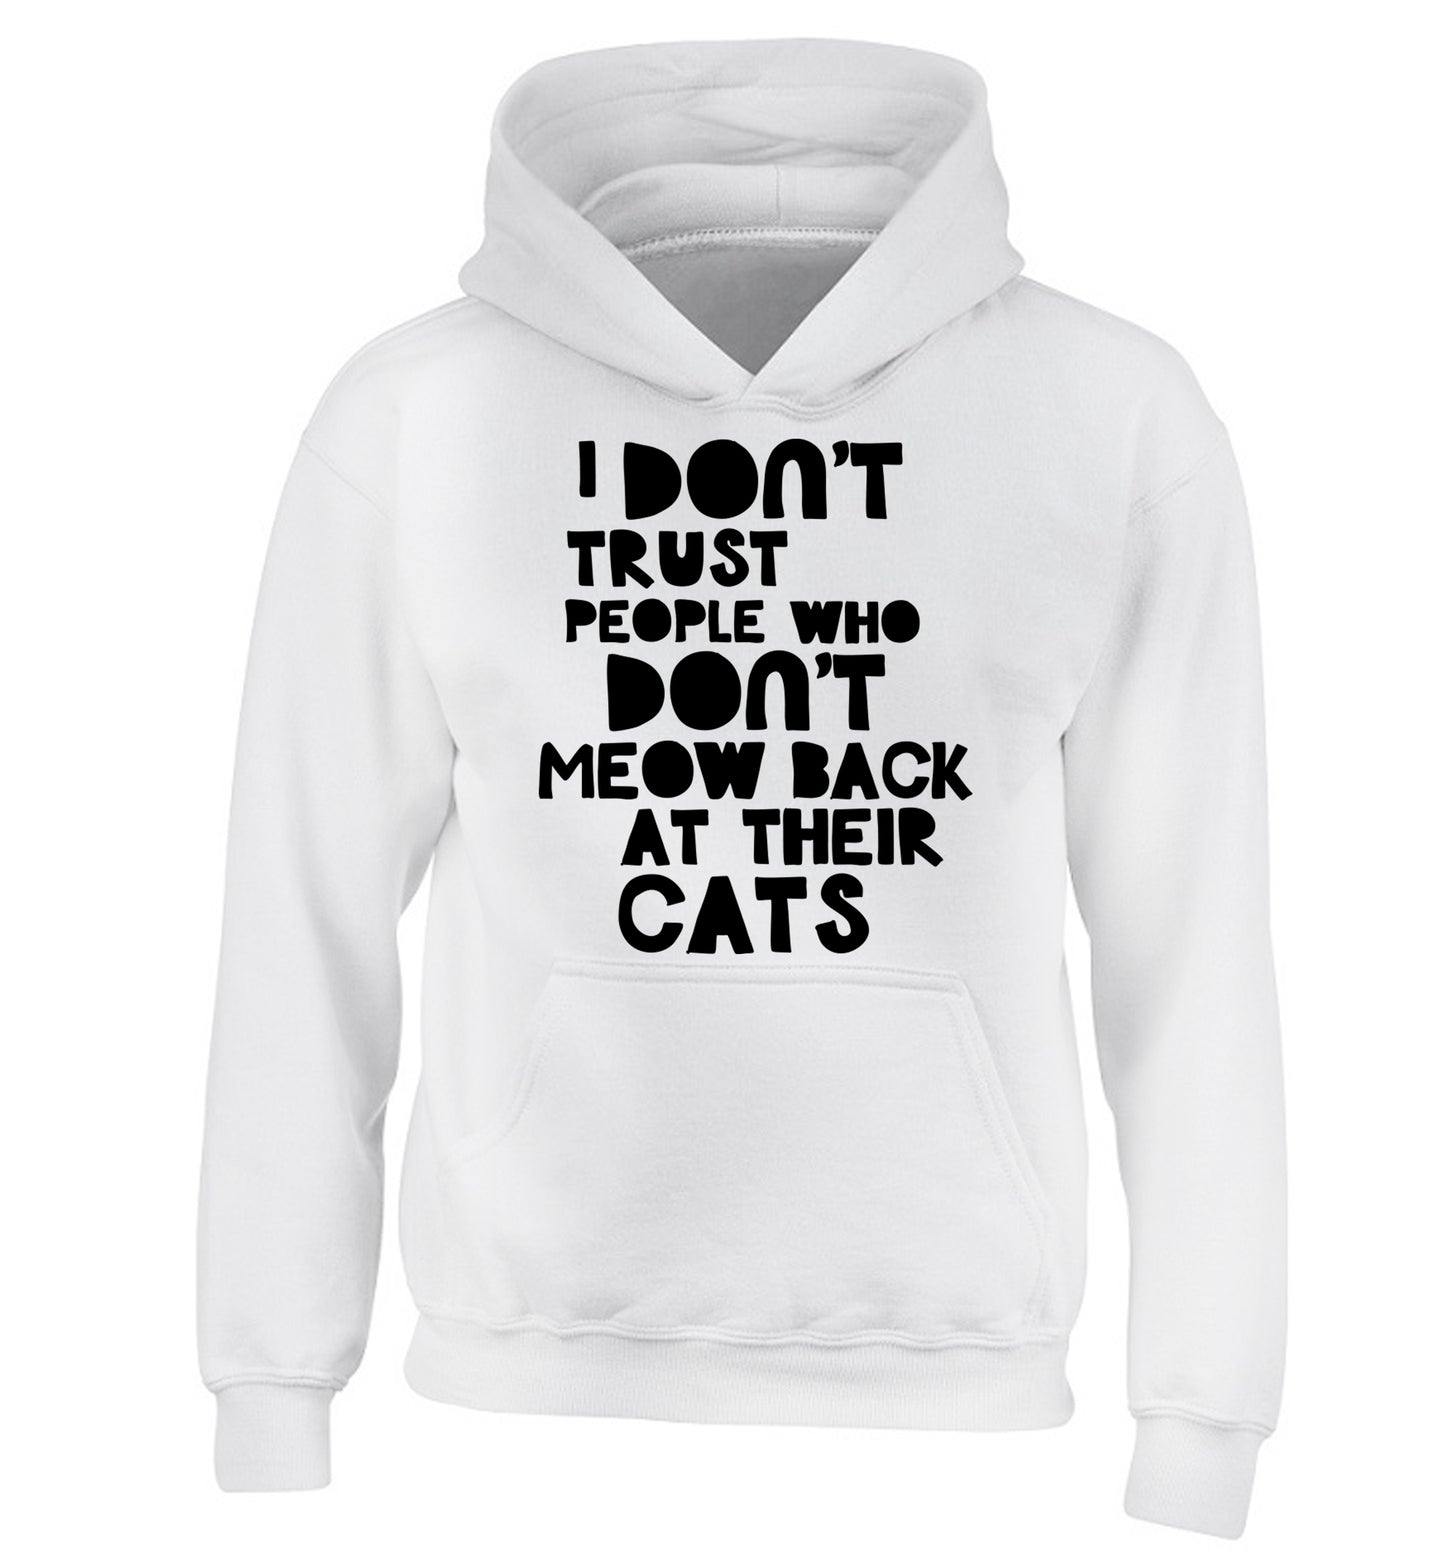 I don't trust people who don't meow back at their cats children's white hoodie 12-13 Years